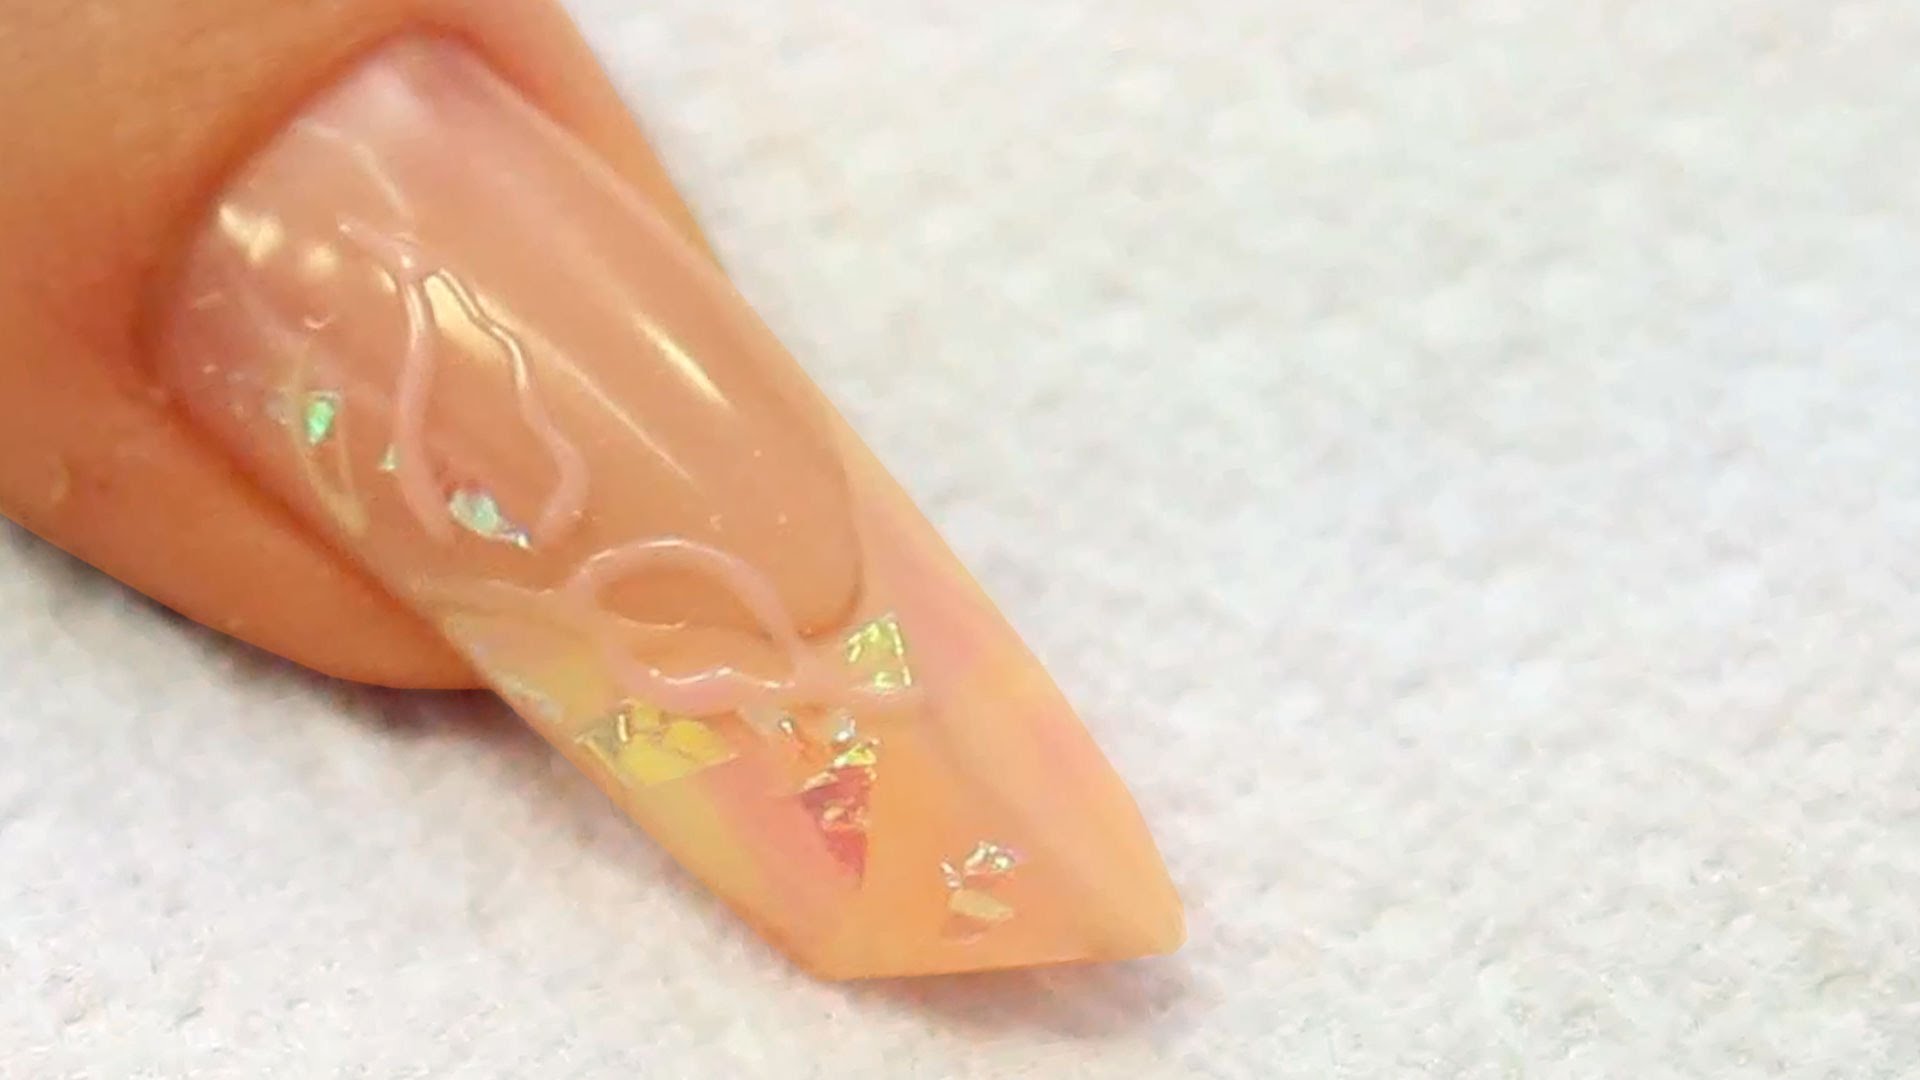 Acrylic Edge Nail Art With Pastel Marble Gel Design